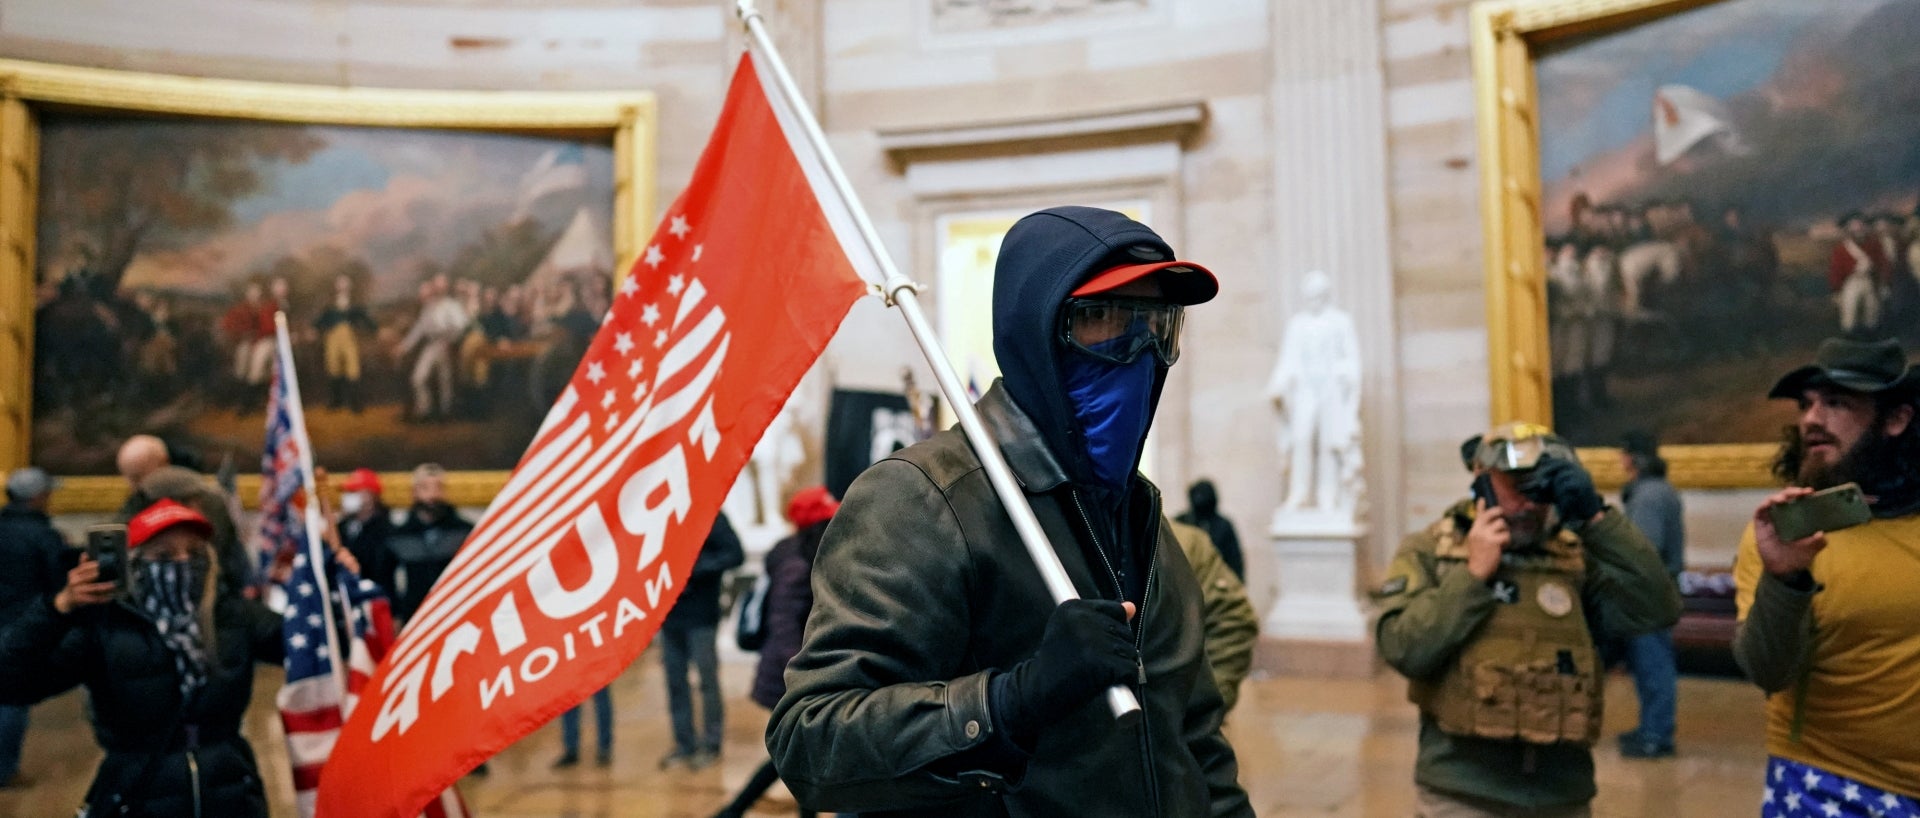 A rioter waves a "Trump Nation" flag inside the Capitol on Jan. 6, 2021.